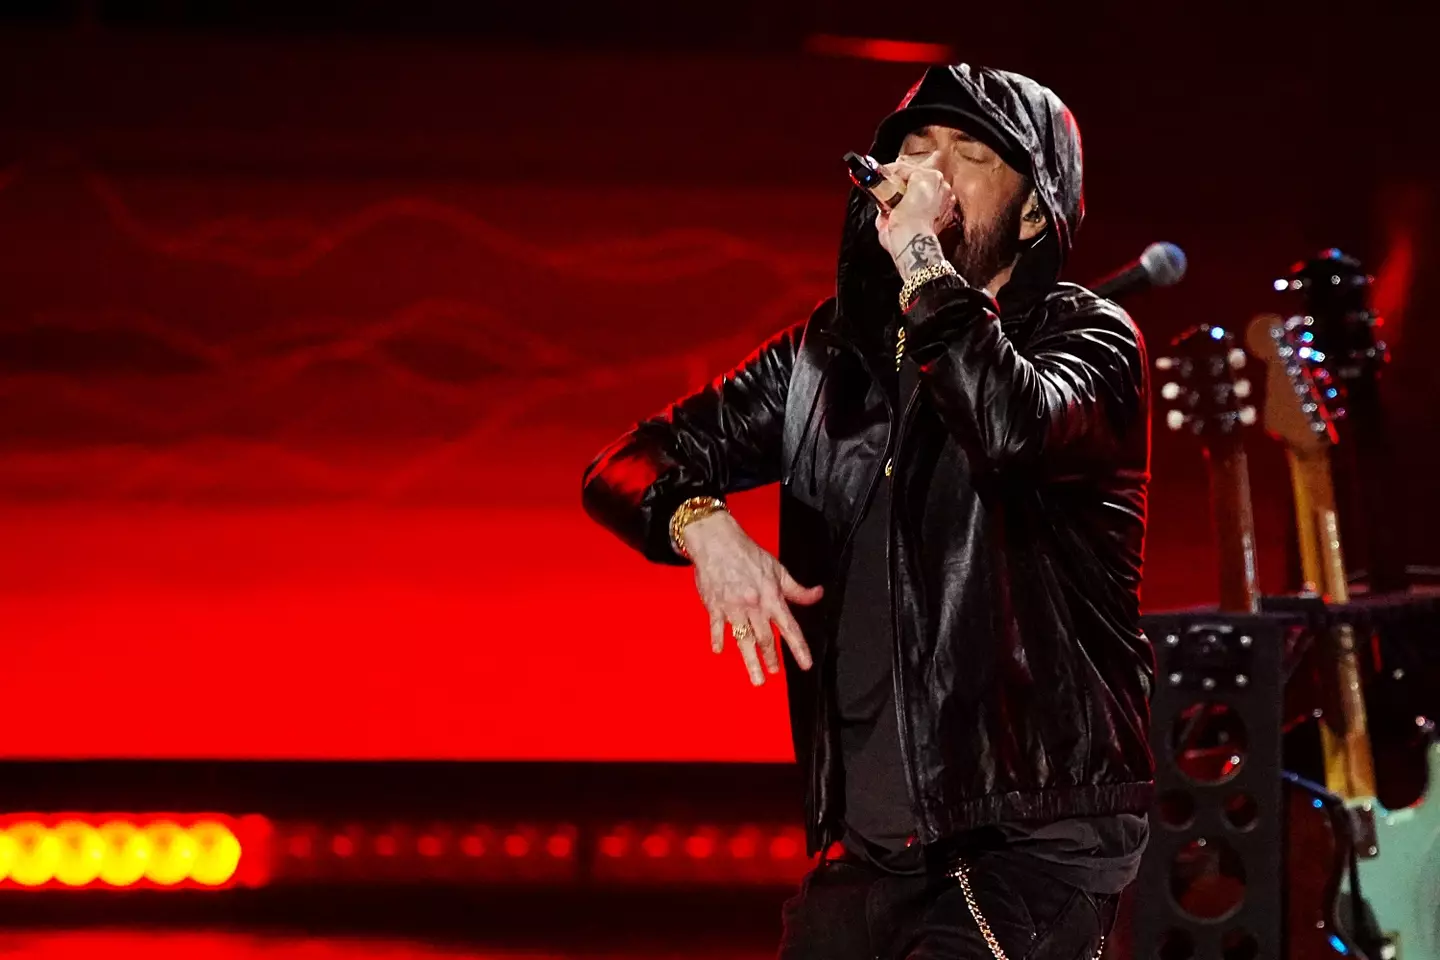 Eminem has admitted that one particular lyric went 'too far'.